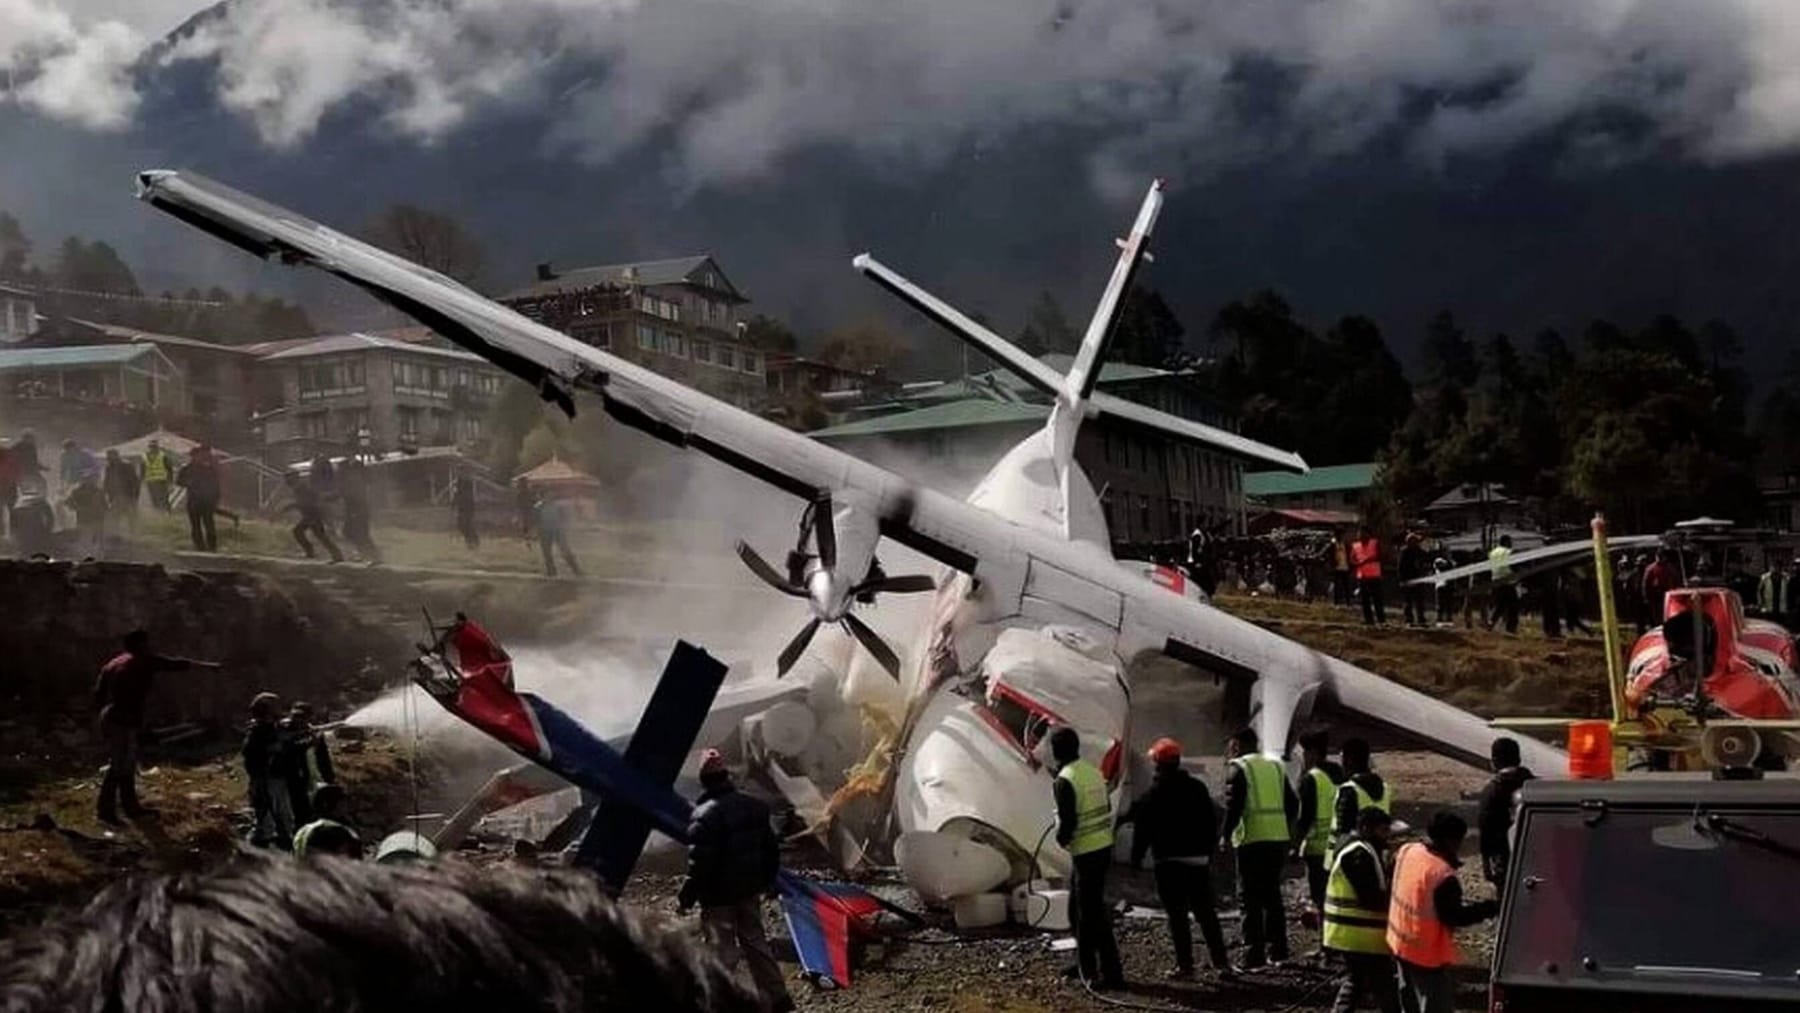 This is why Nepal is considered the most dangerous airspace in the world